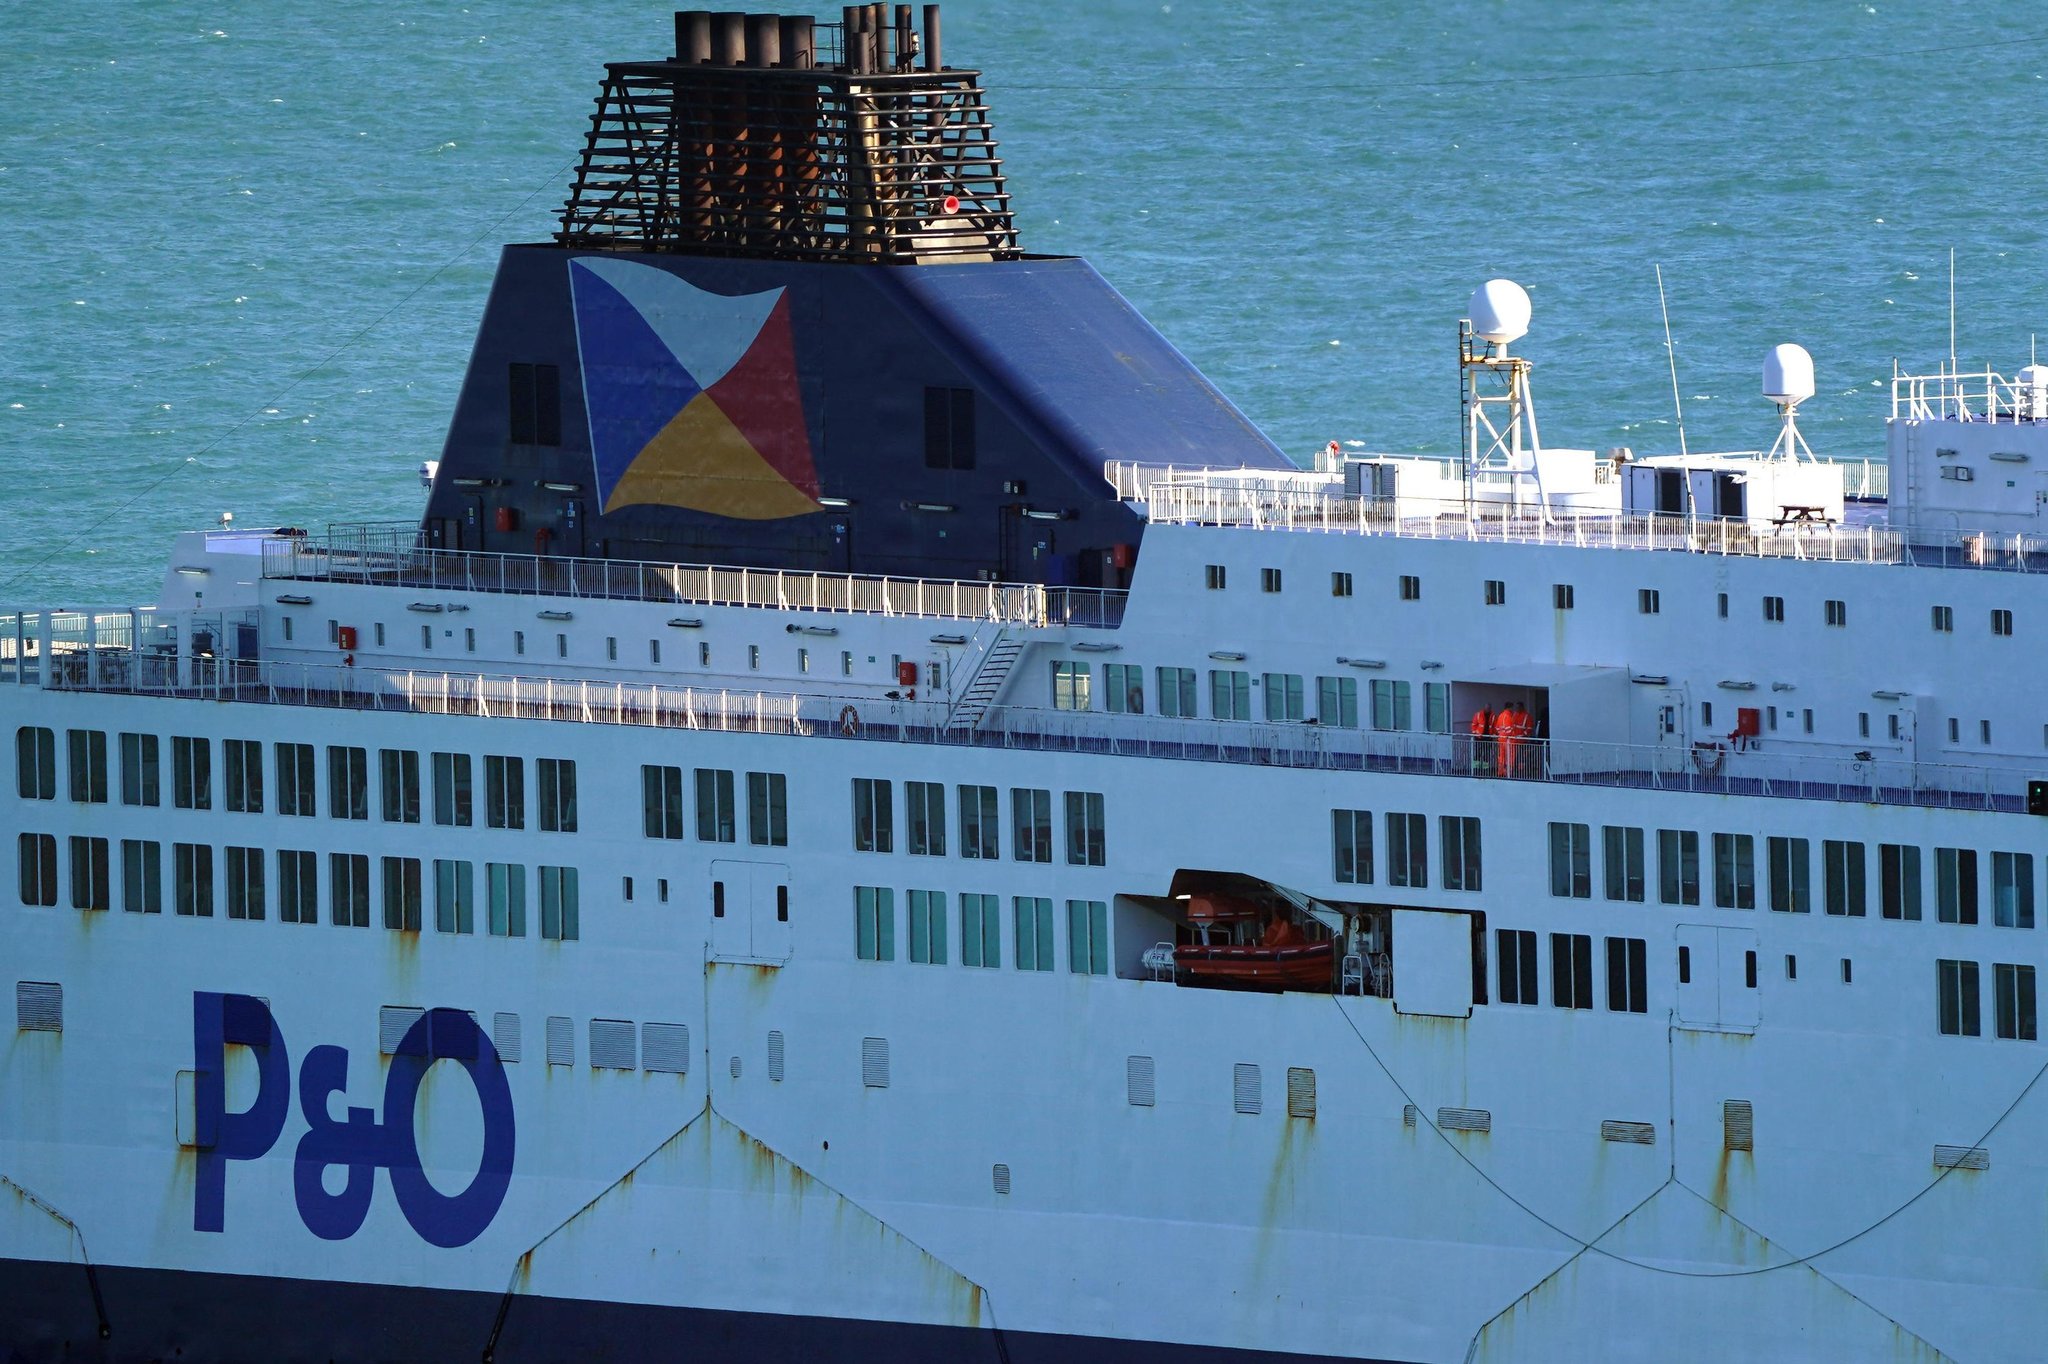 Ministers 'knew of P&O Ferries' plans to slash jobs'